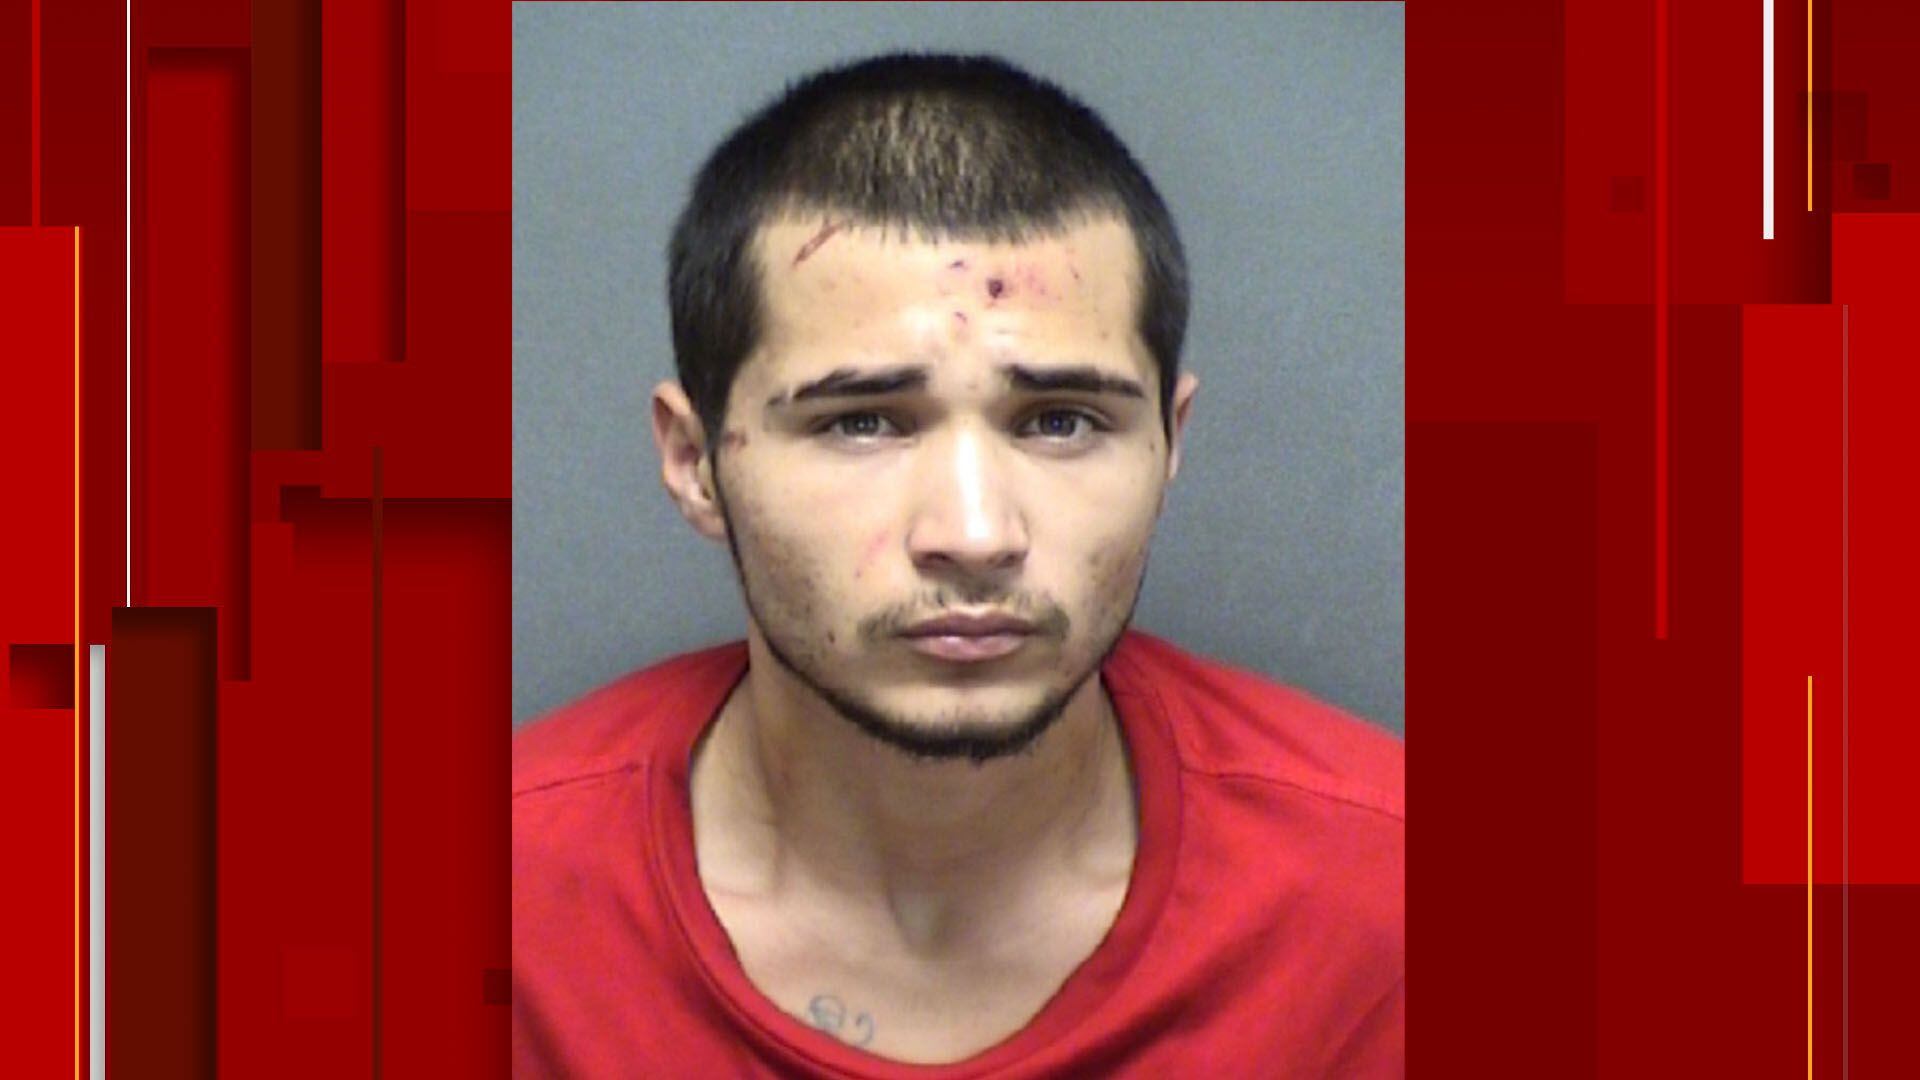 Gilbert Torres is charged with murder in connection with the shooting death of Mario Alverez in August 2022.